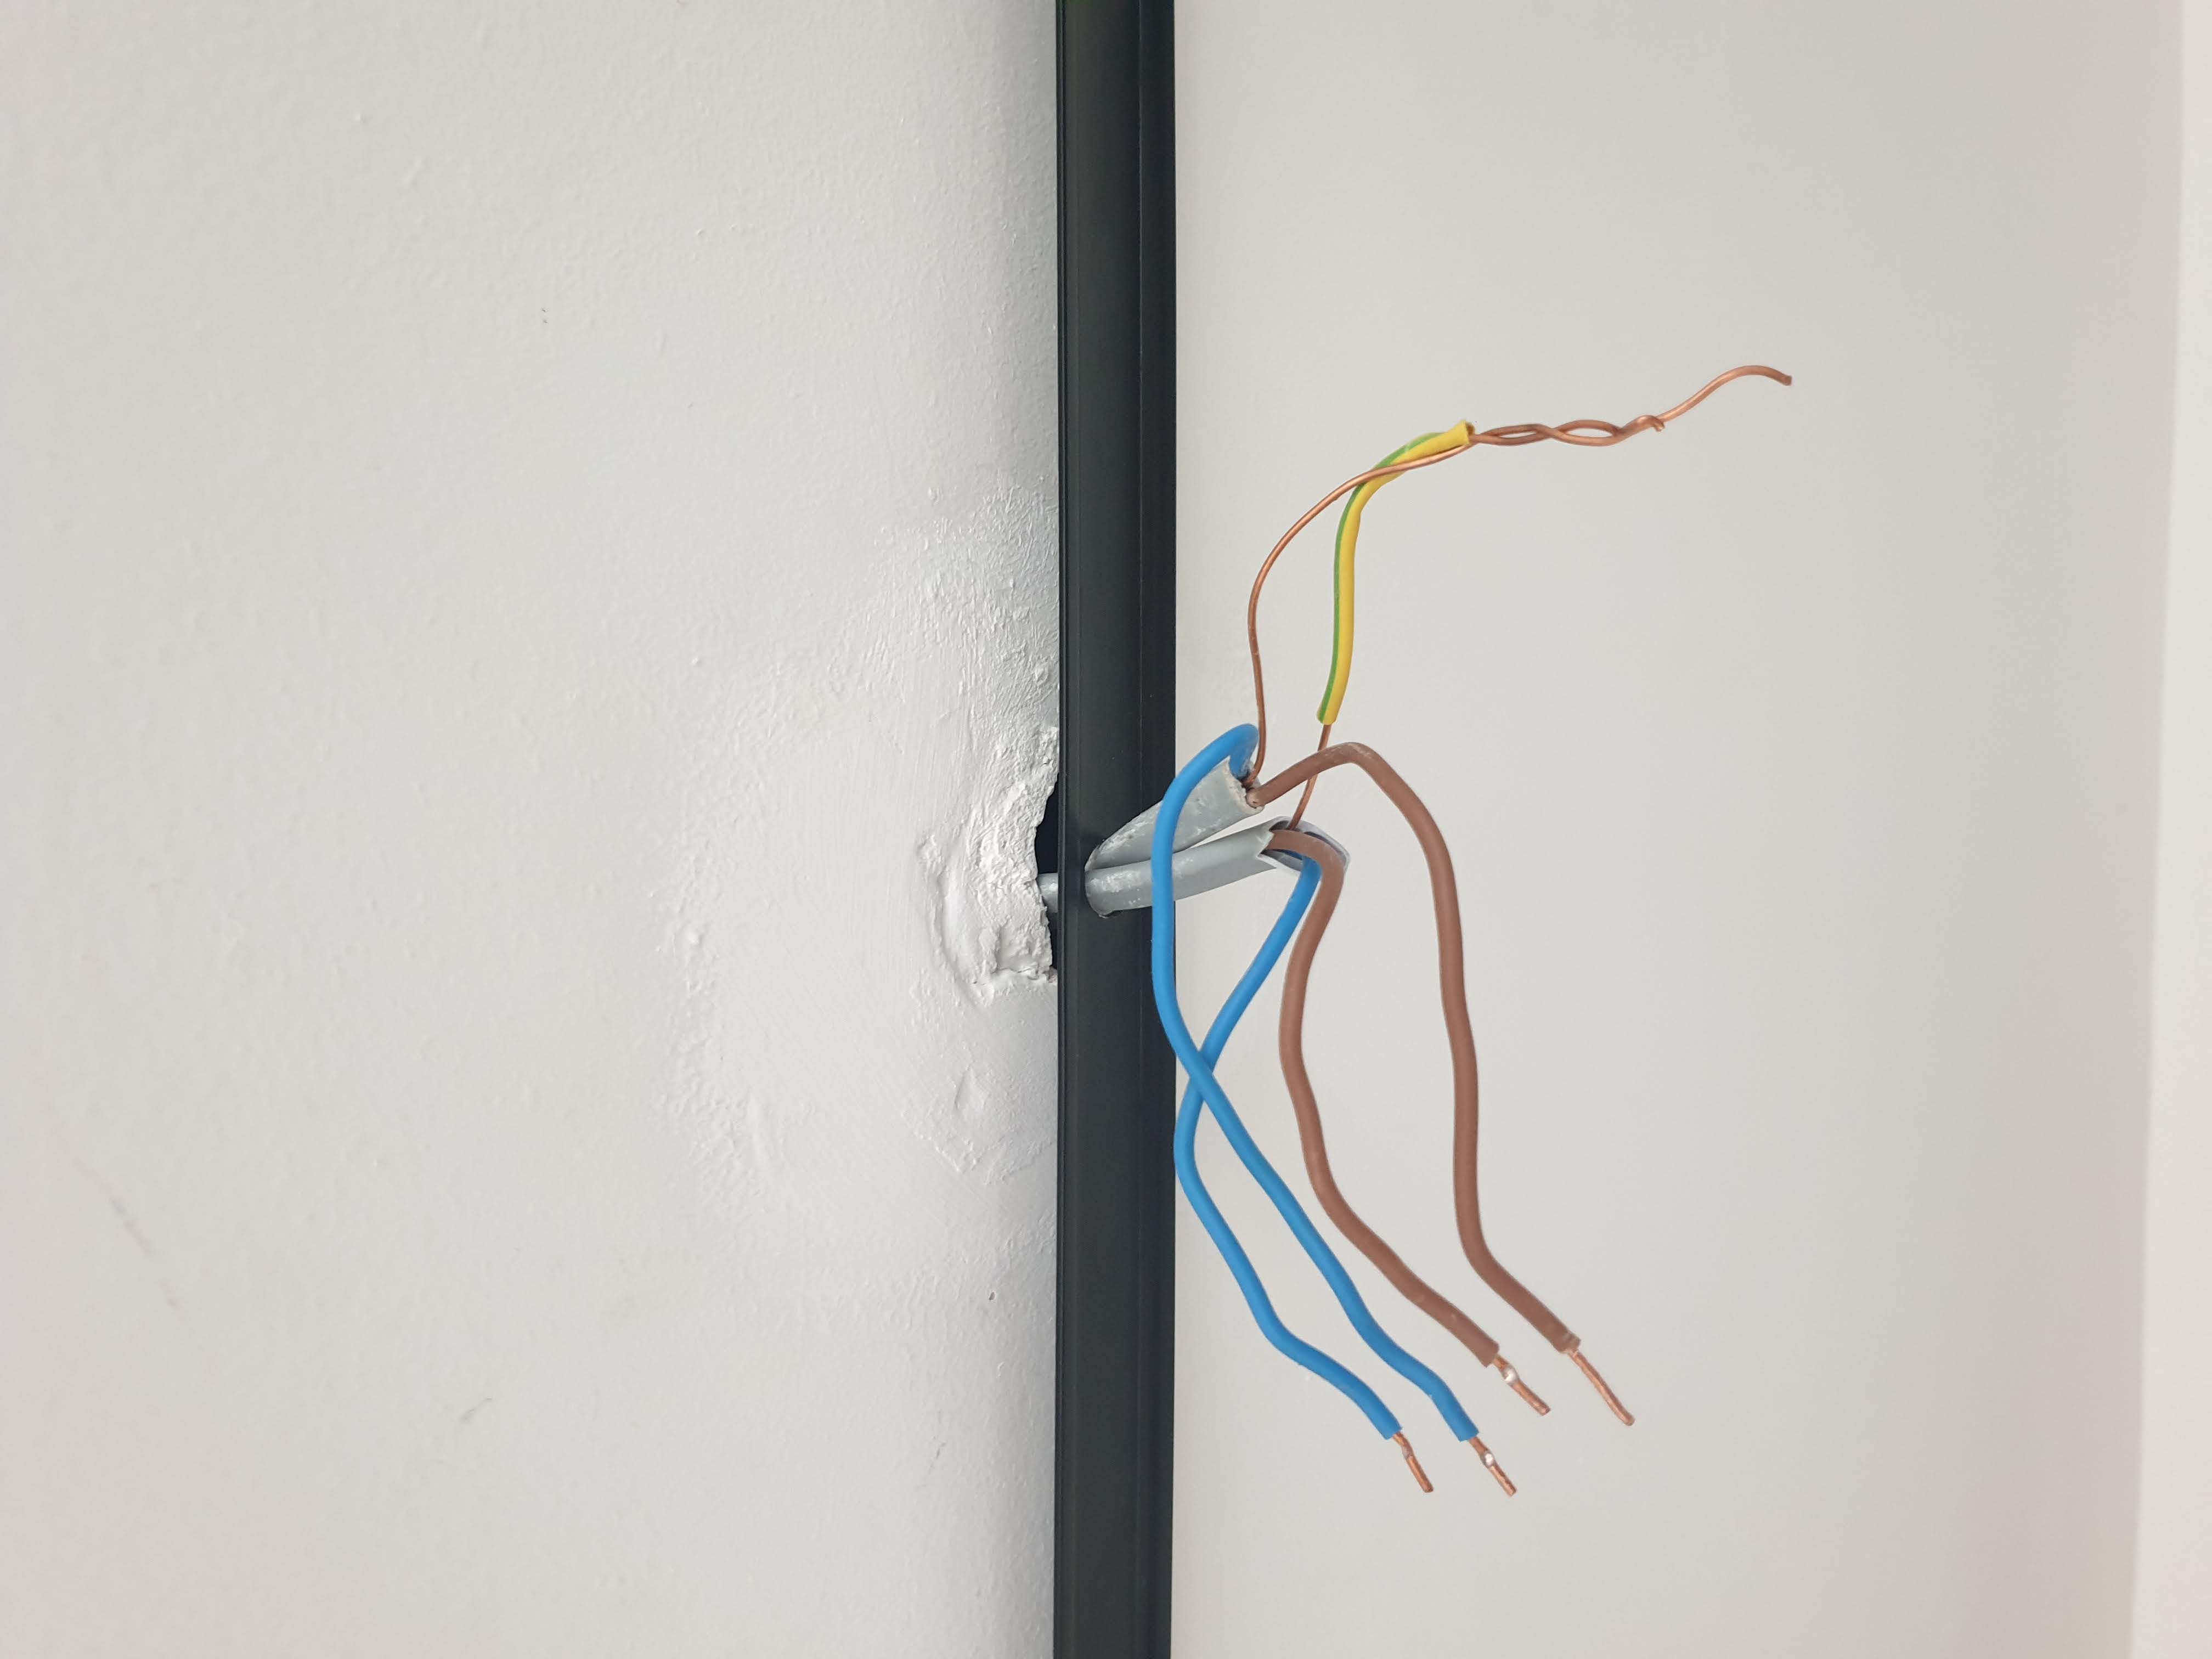 Image for 2 cables of ceiling light